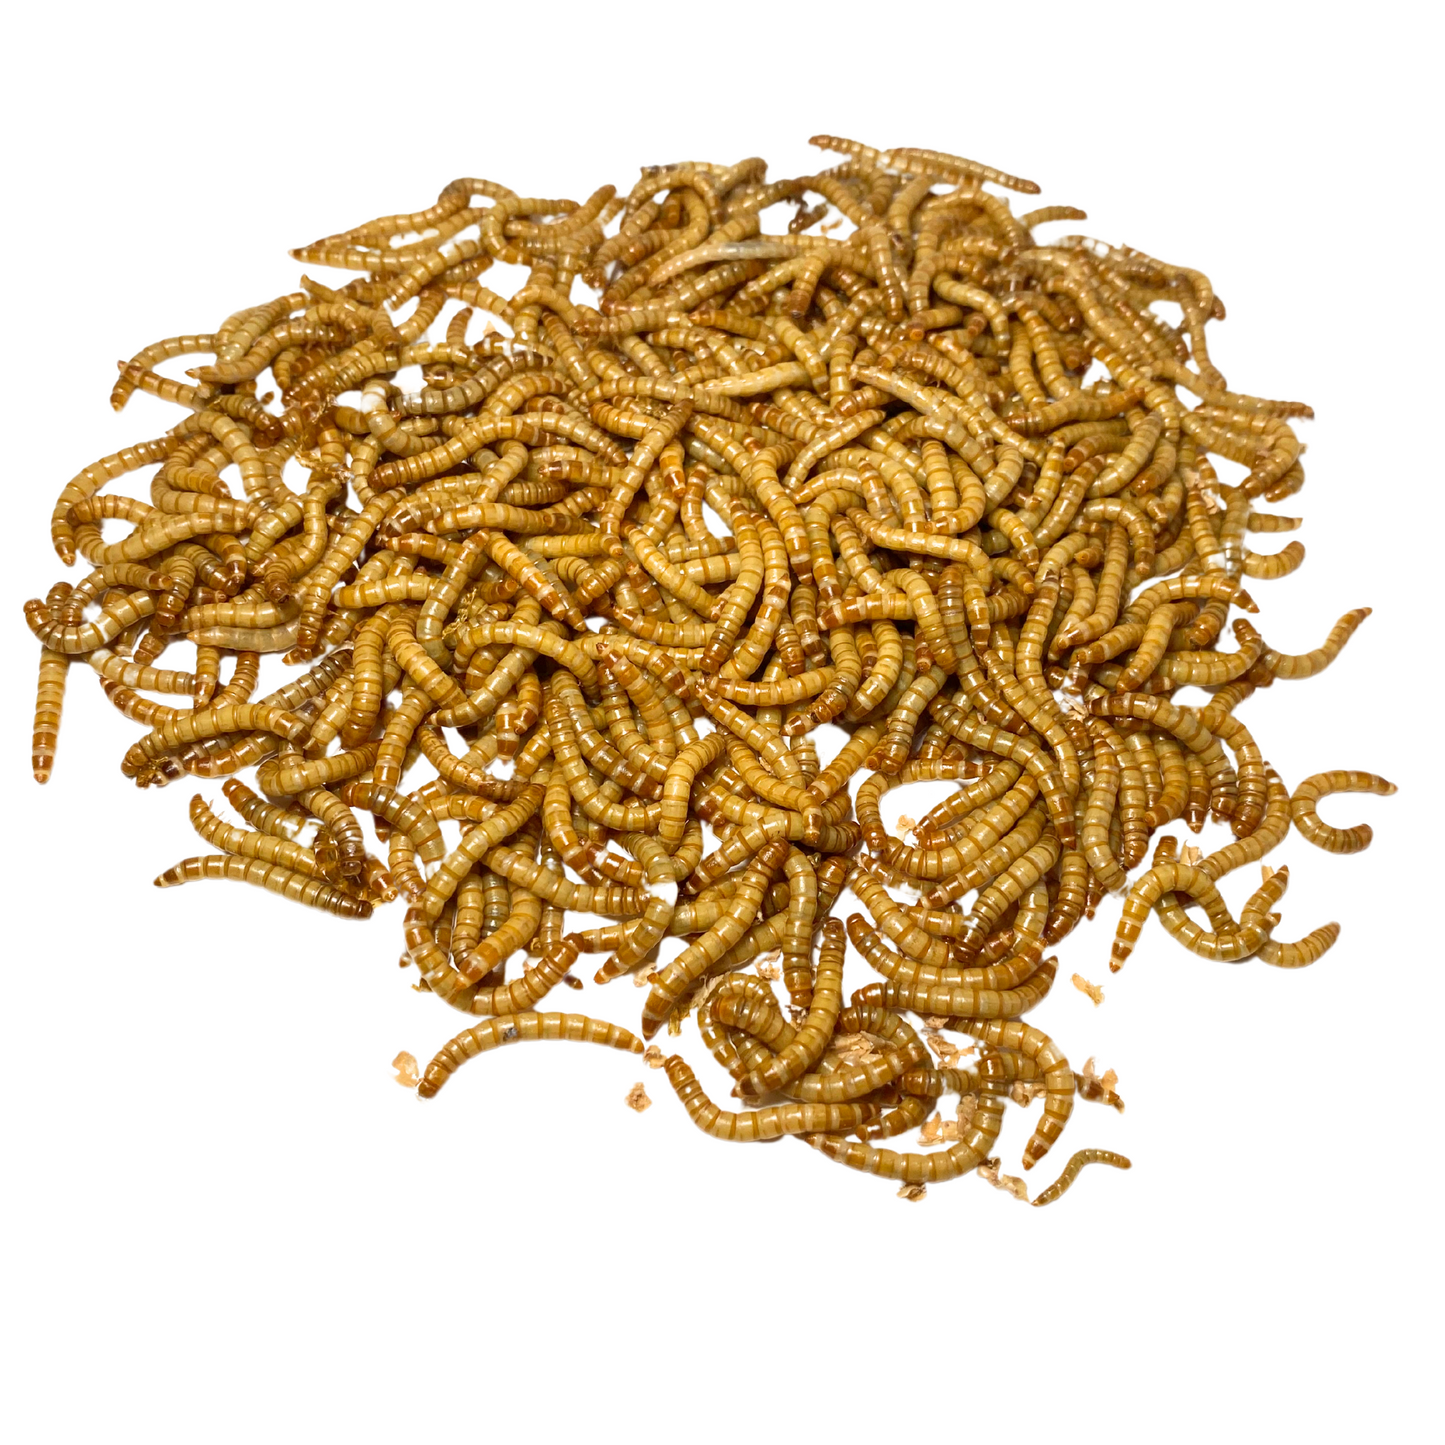 1,000 Live Mealworms